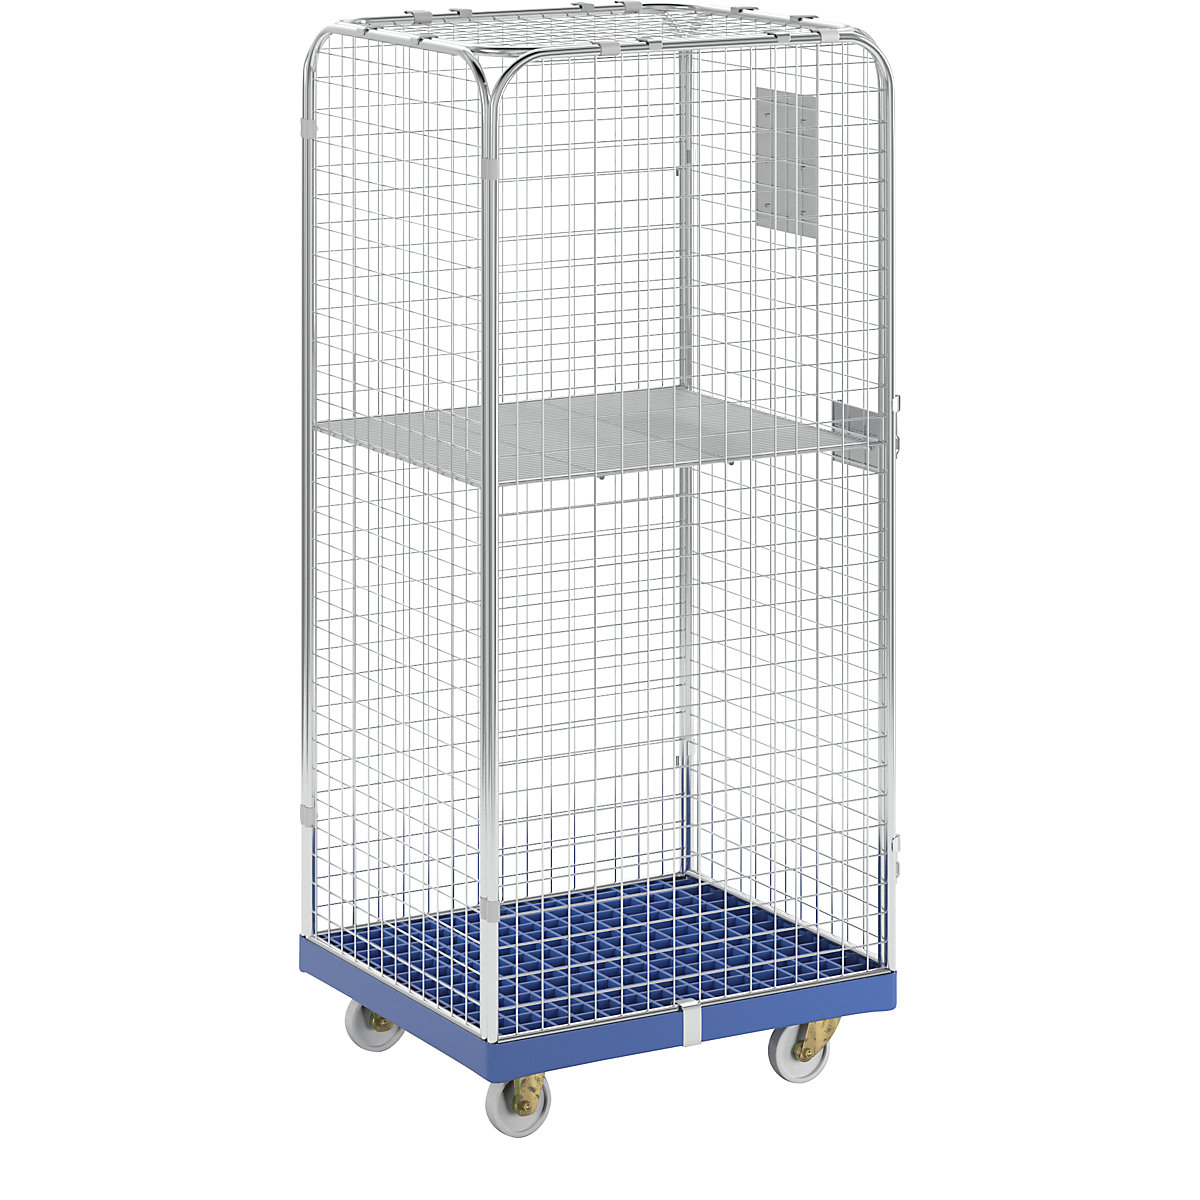 Rollcontainer SAFE, alt. x largh. x prof. 1800 x 720 x 810 mm, pianale con ruote blu-1